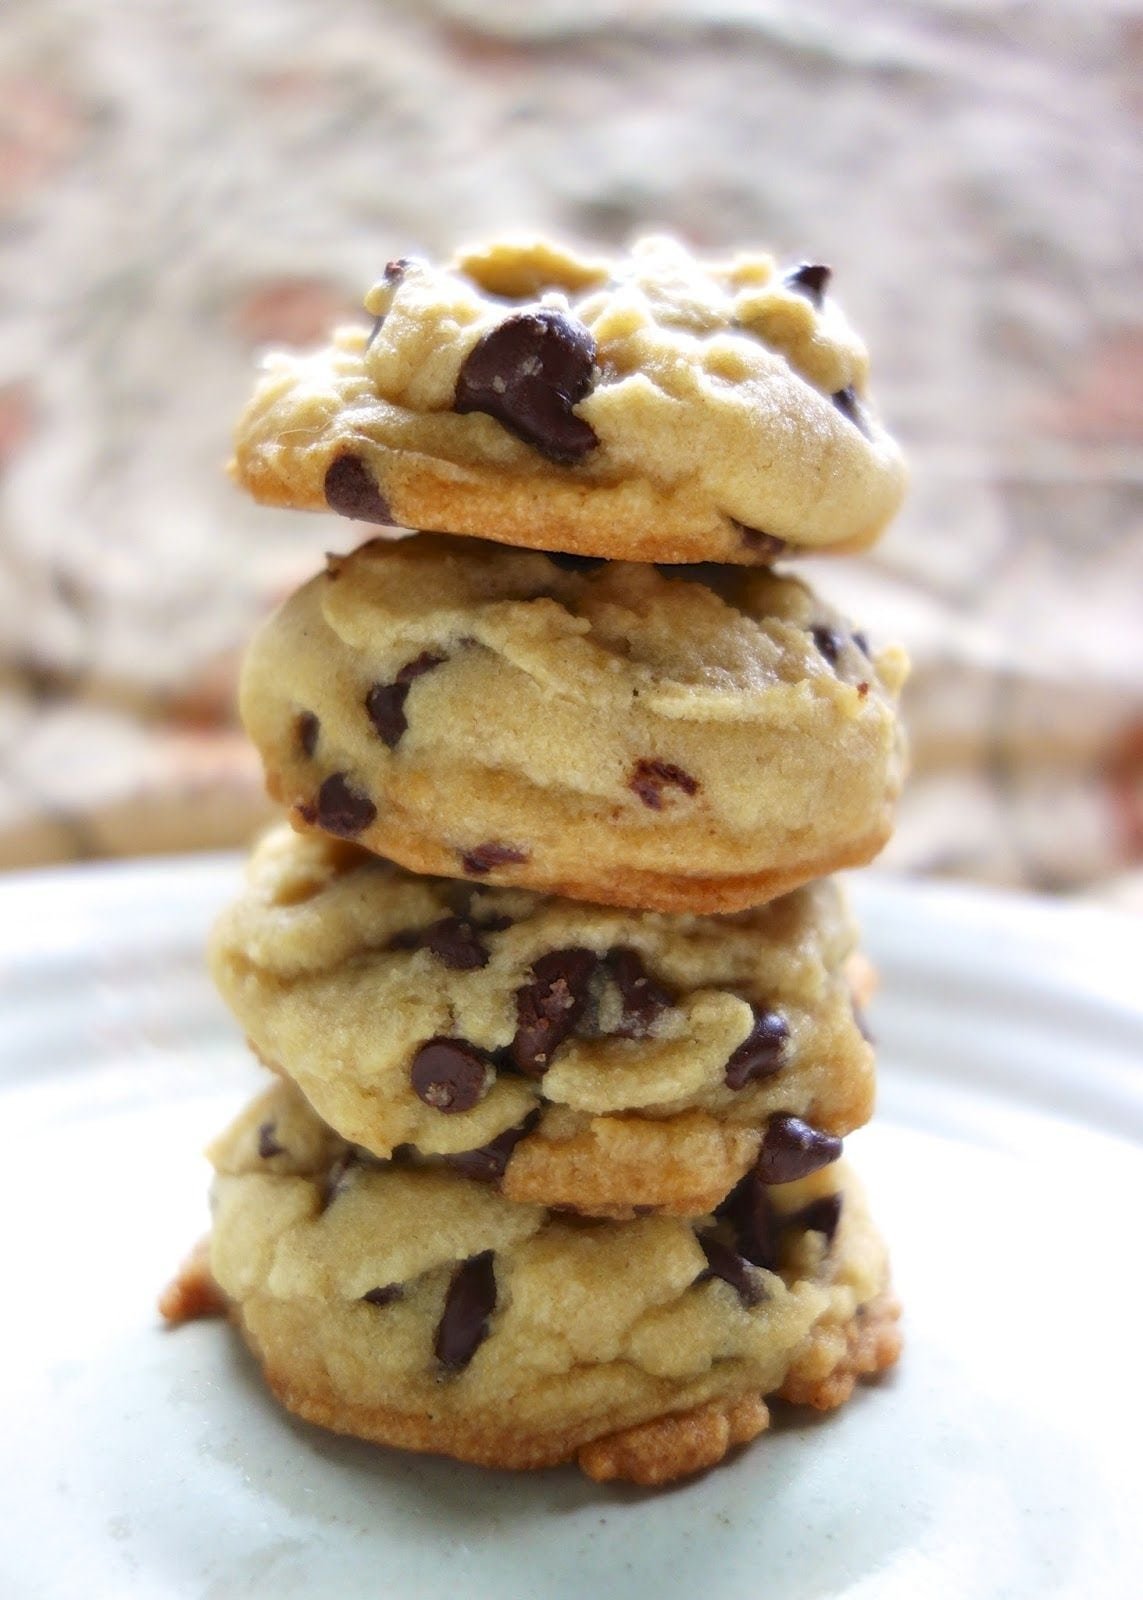 Coconut Oil Chocolate Chip Cookies